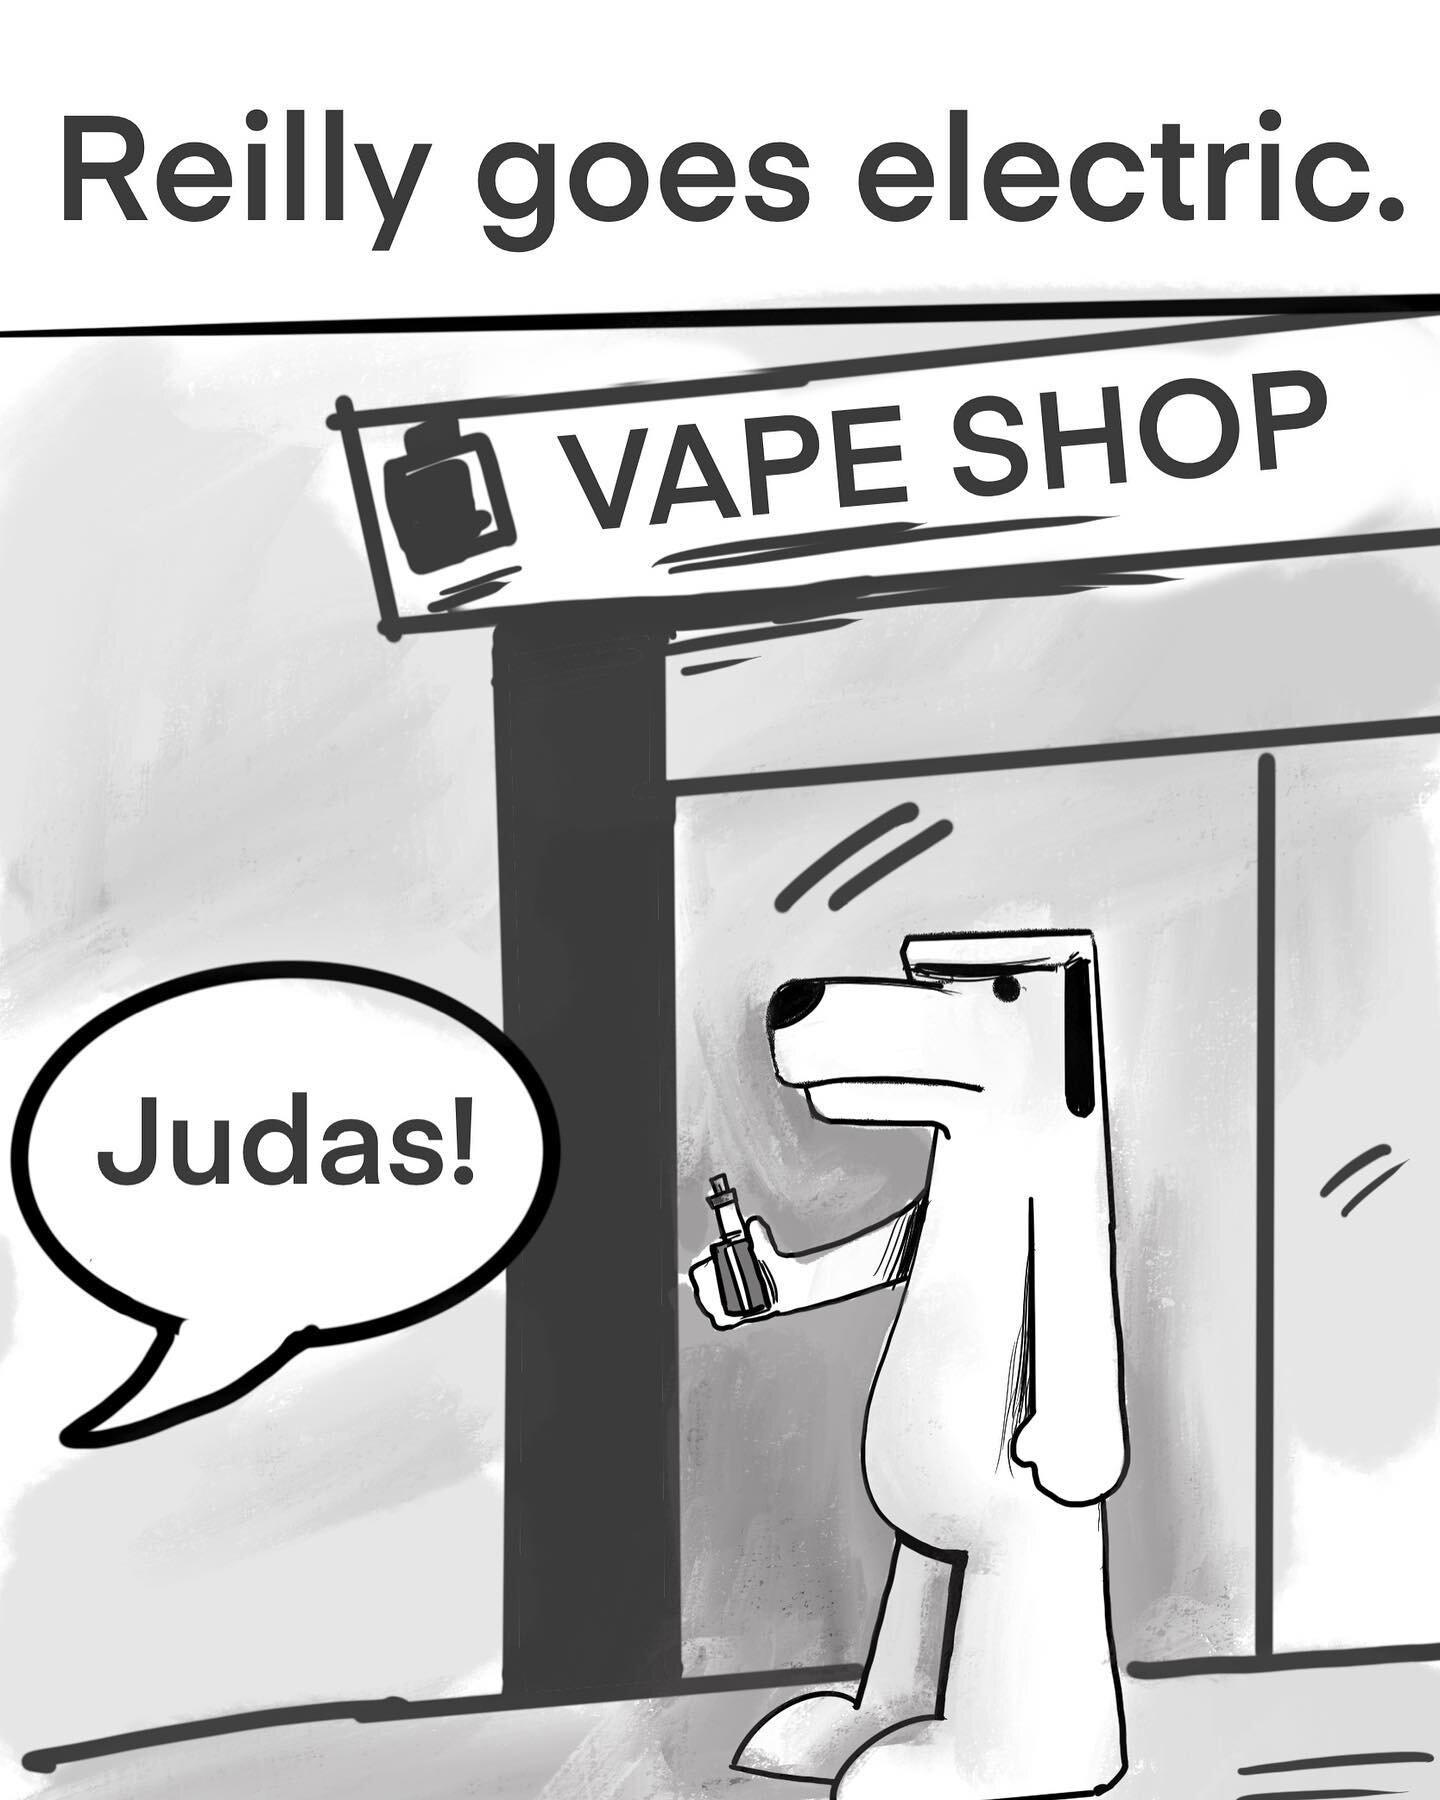 Reilly goes electric. #bobdylan #doghousereillycomic #webcomic #comedy